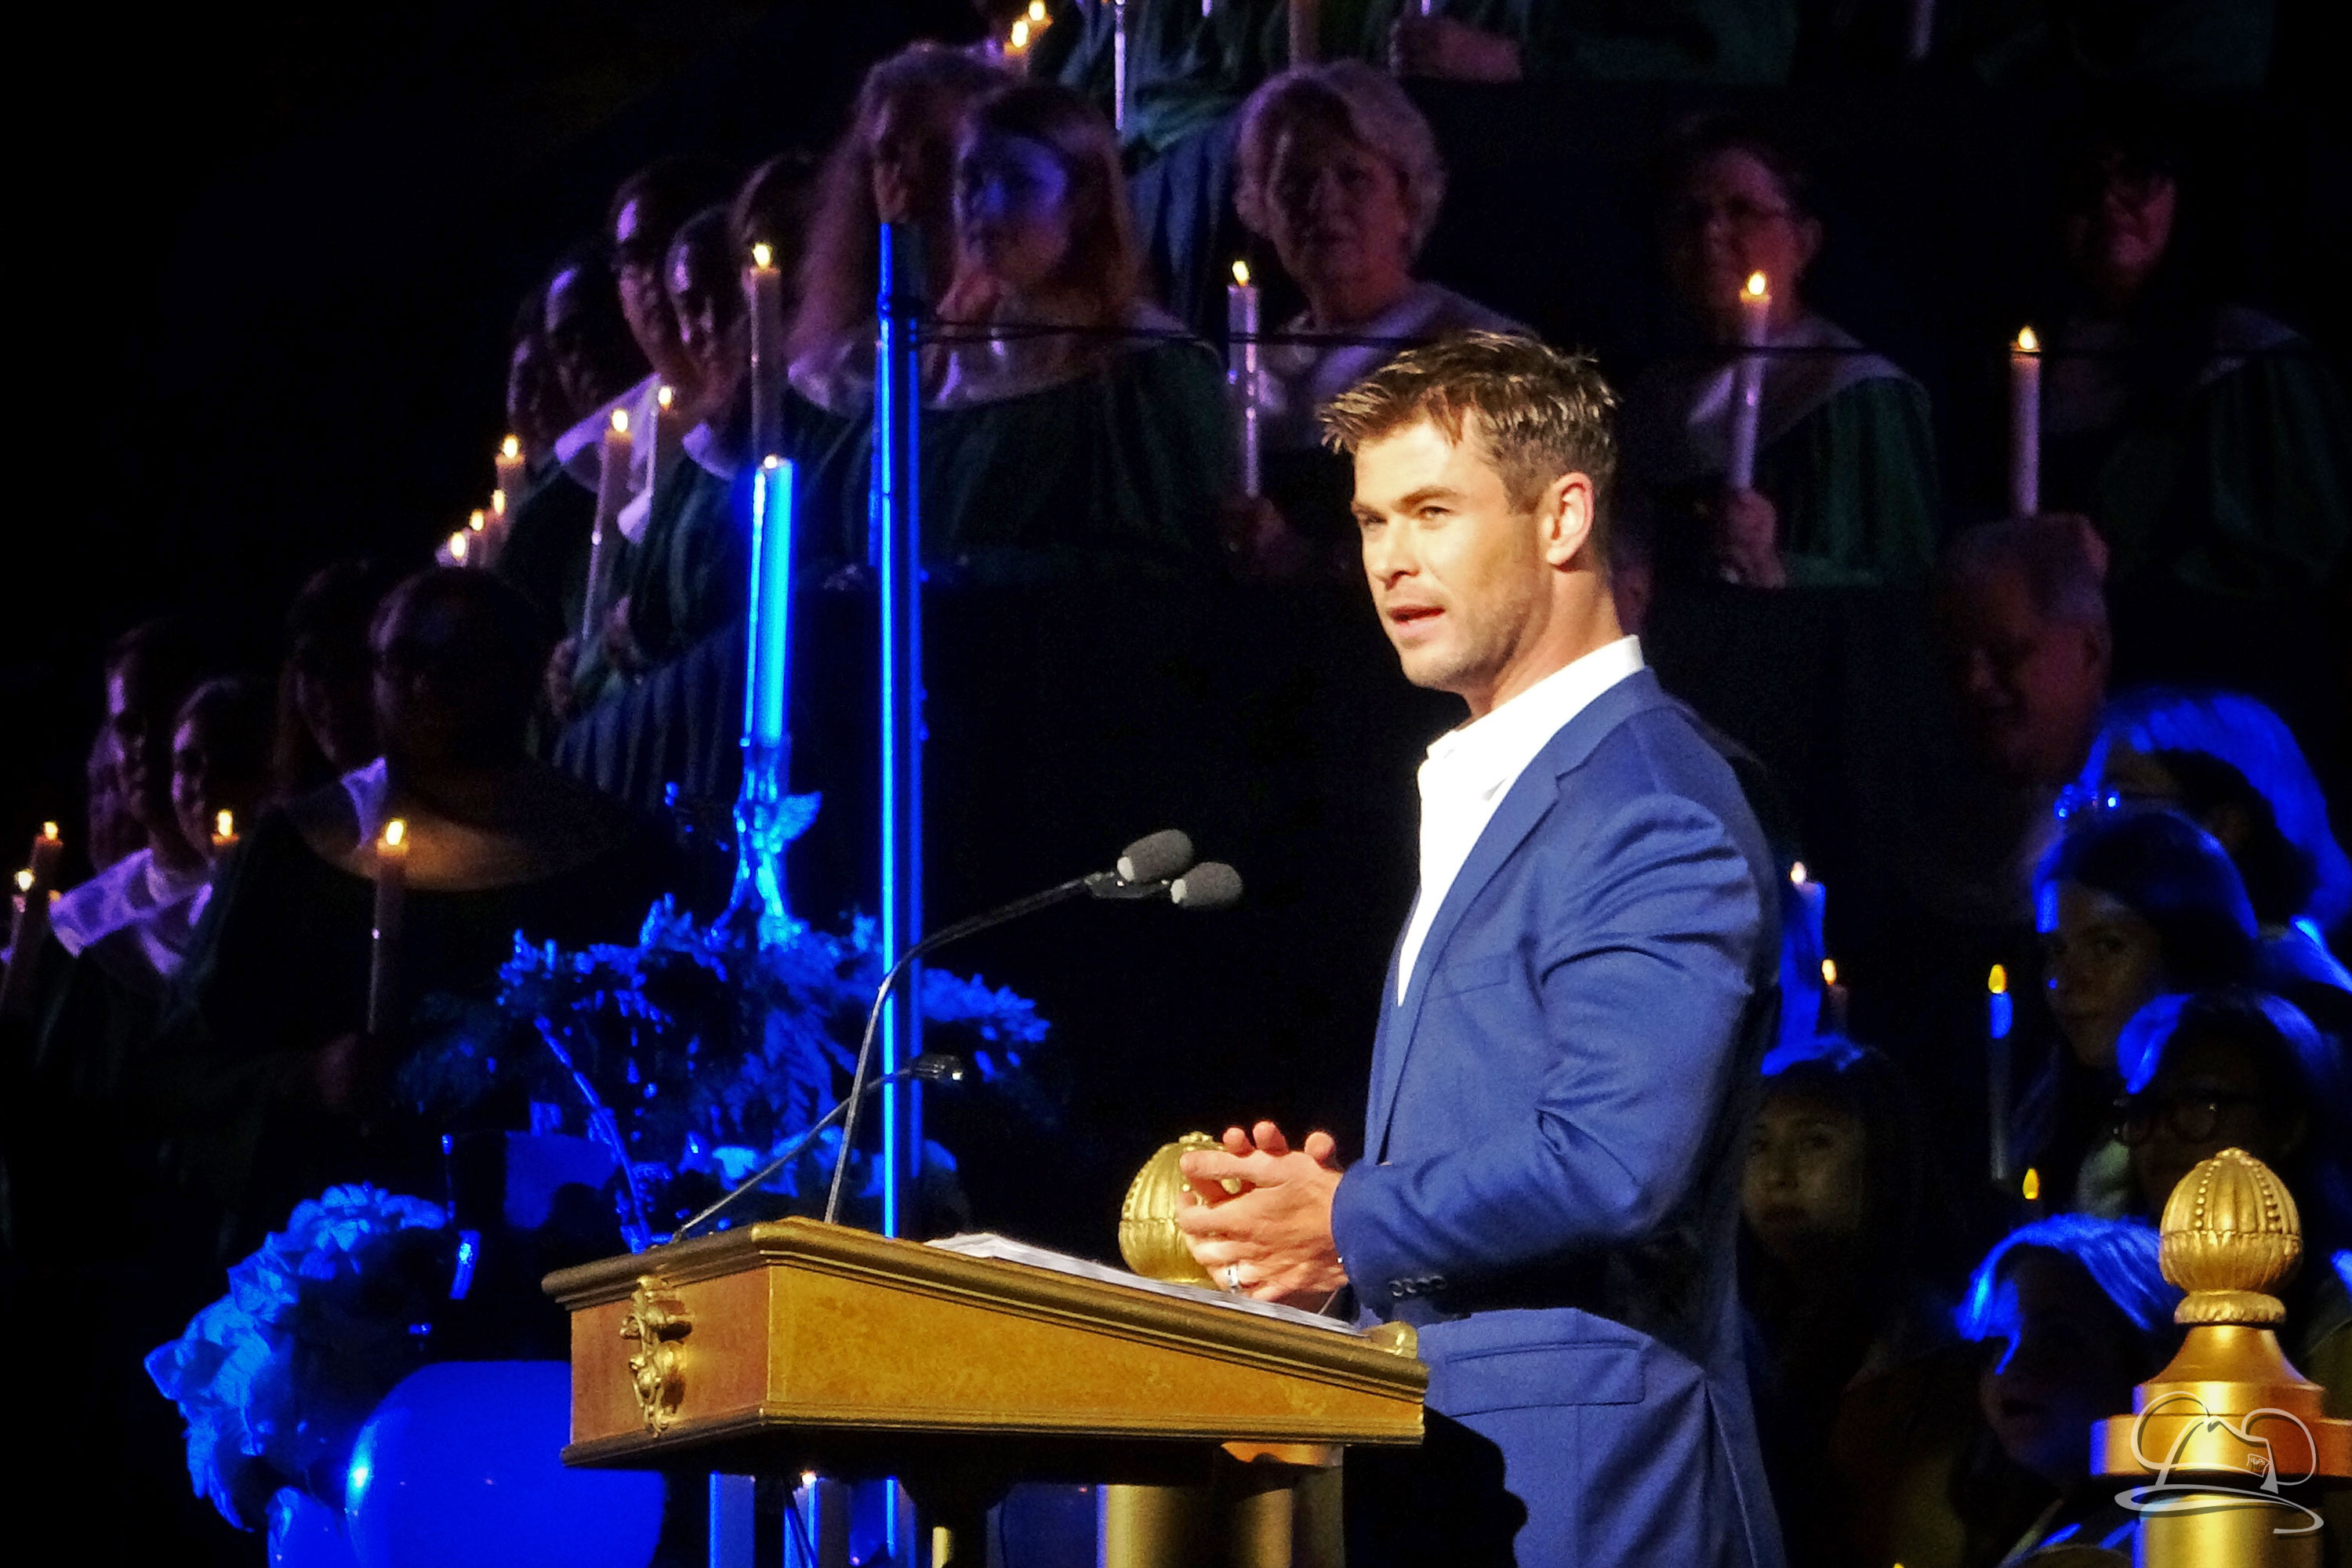 Disneyland’s Candlelight Processional and Ceremony Celebrates Christmas Story with Chris Hemsworth